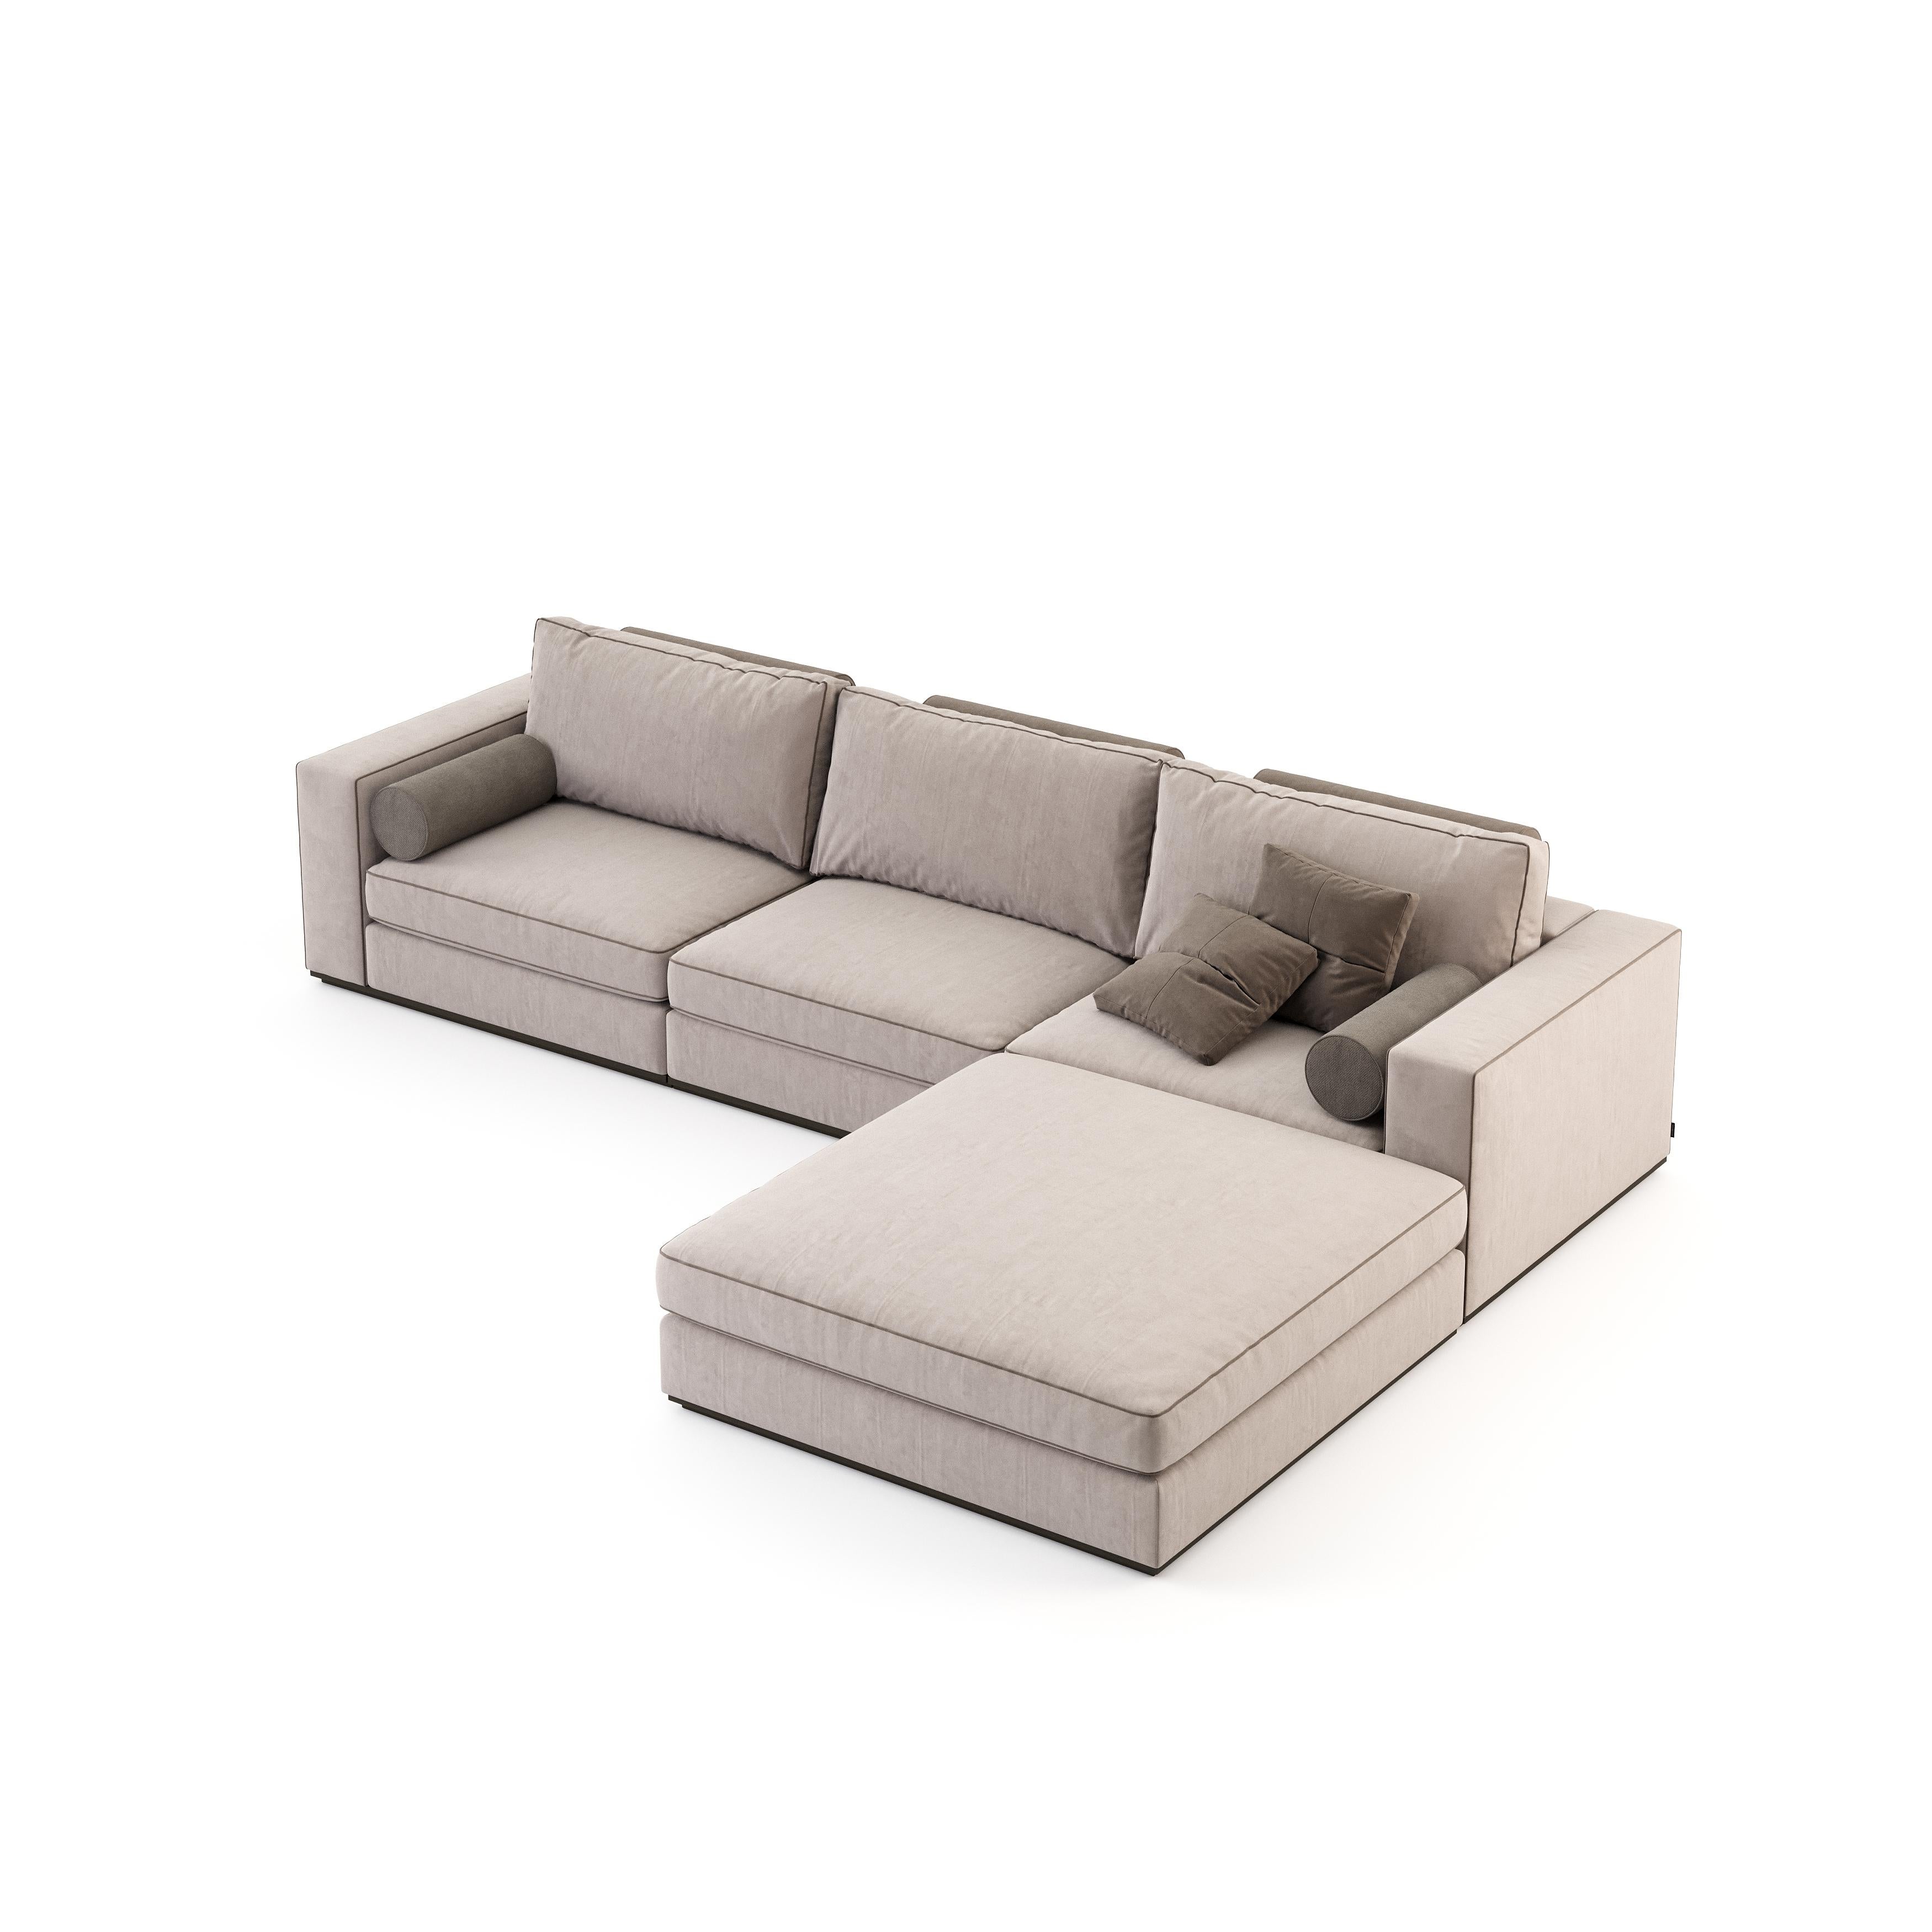 stratford gray chaise lounge